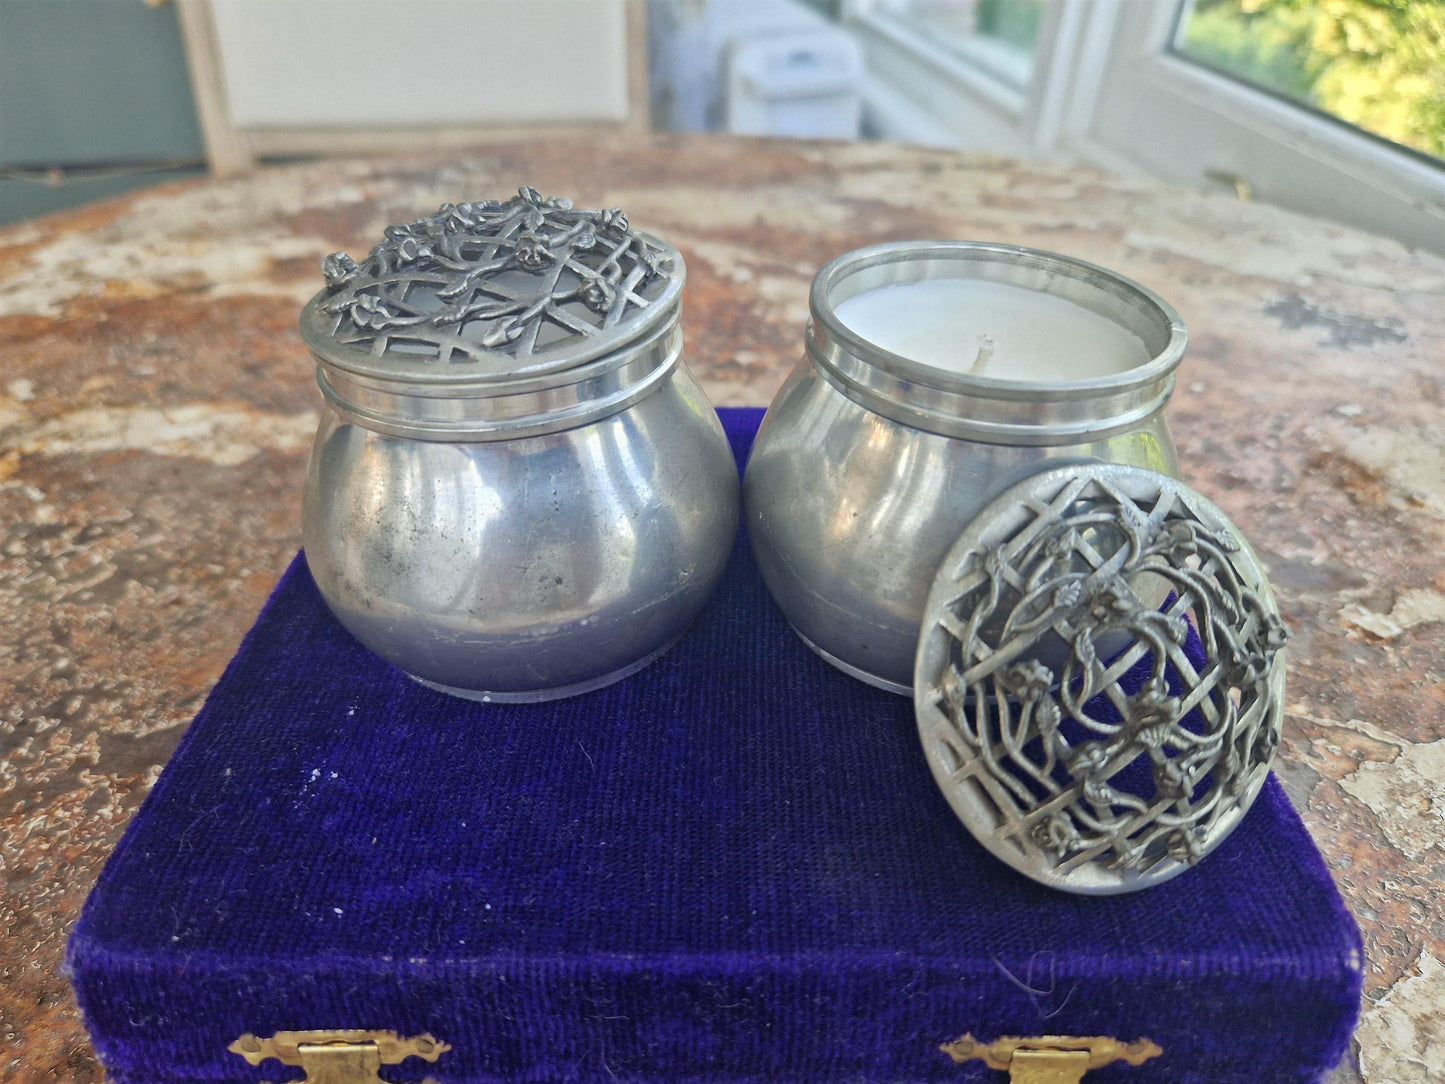 Royal Selangor Pewter Candle with Vintage Bookshop Scent-2